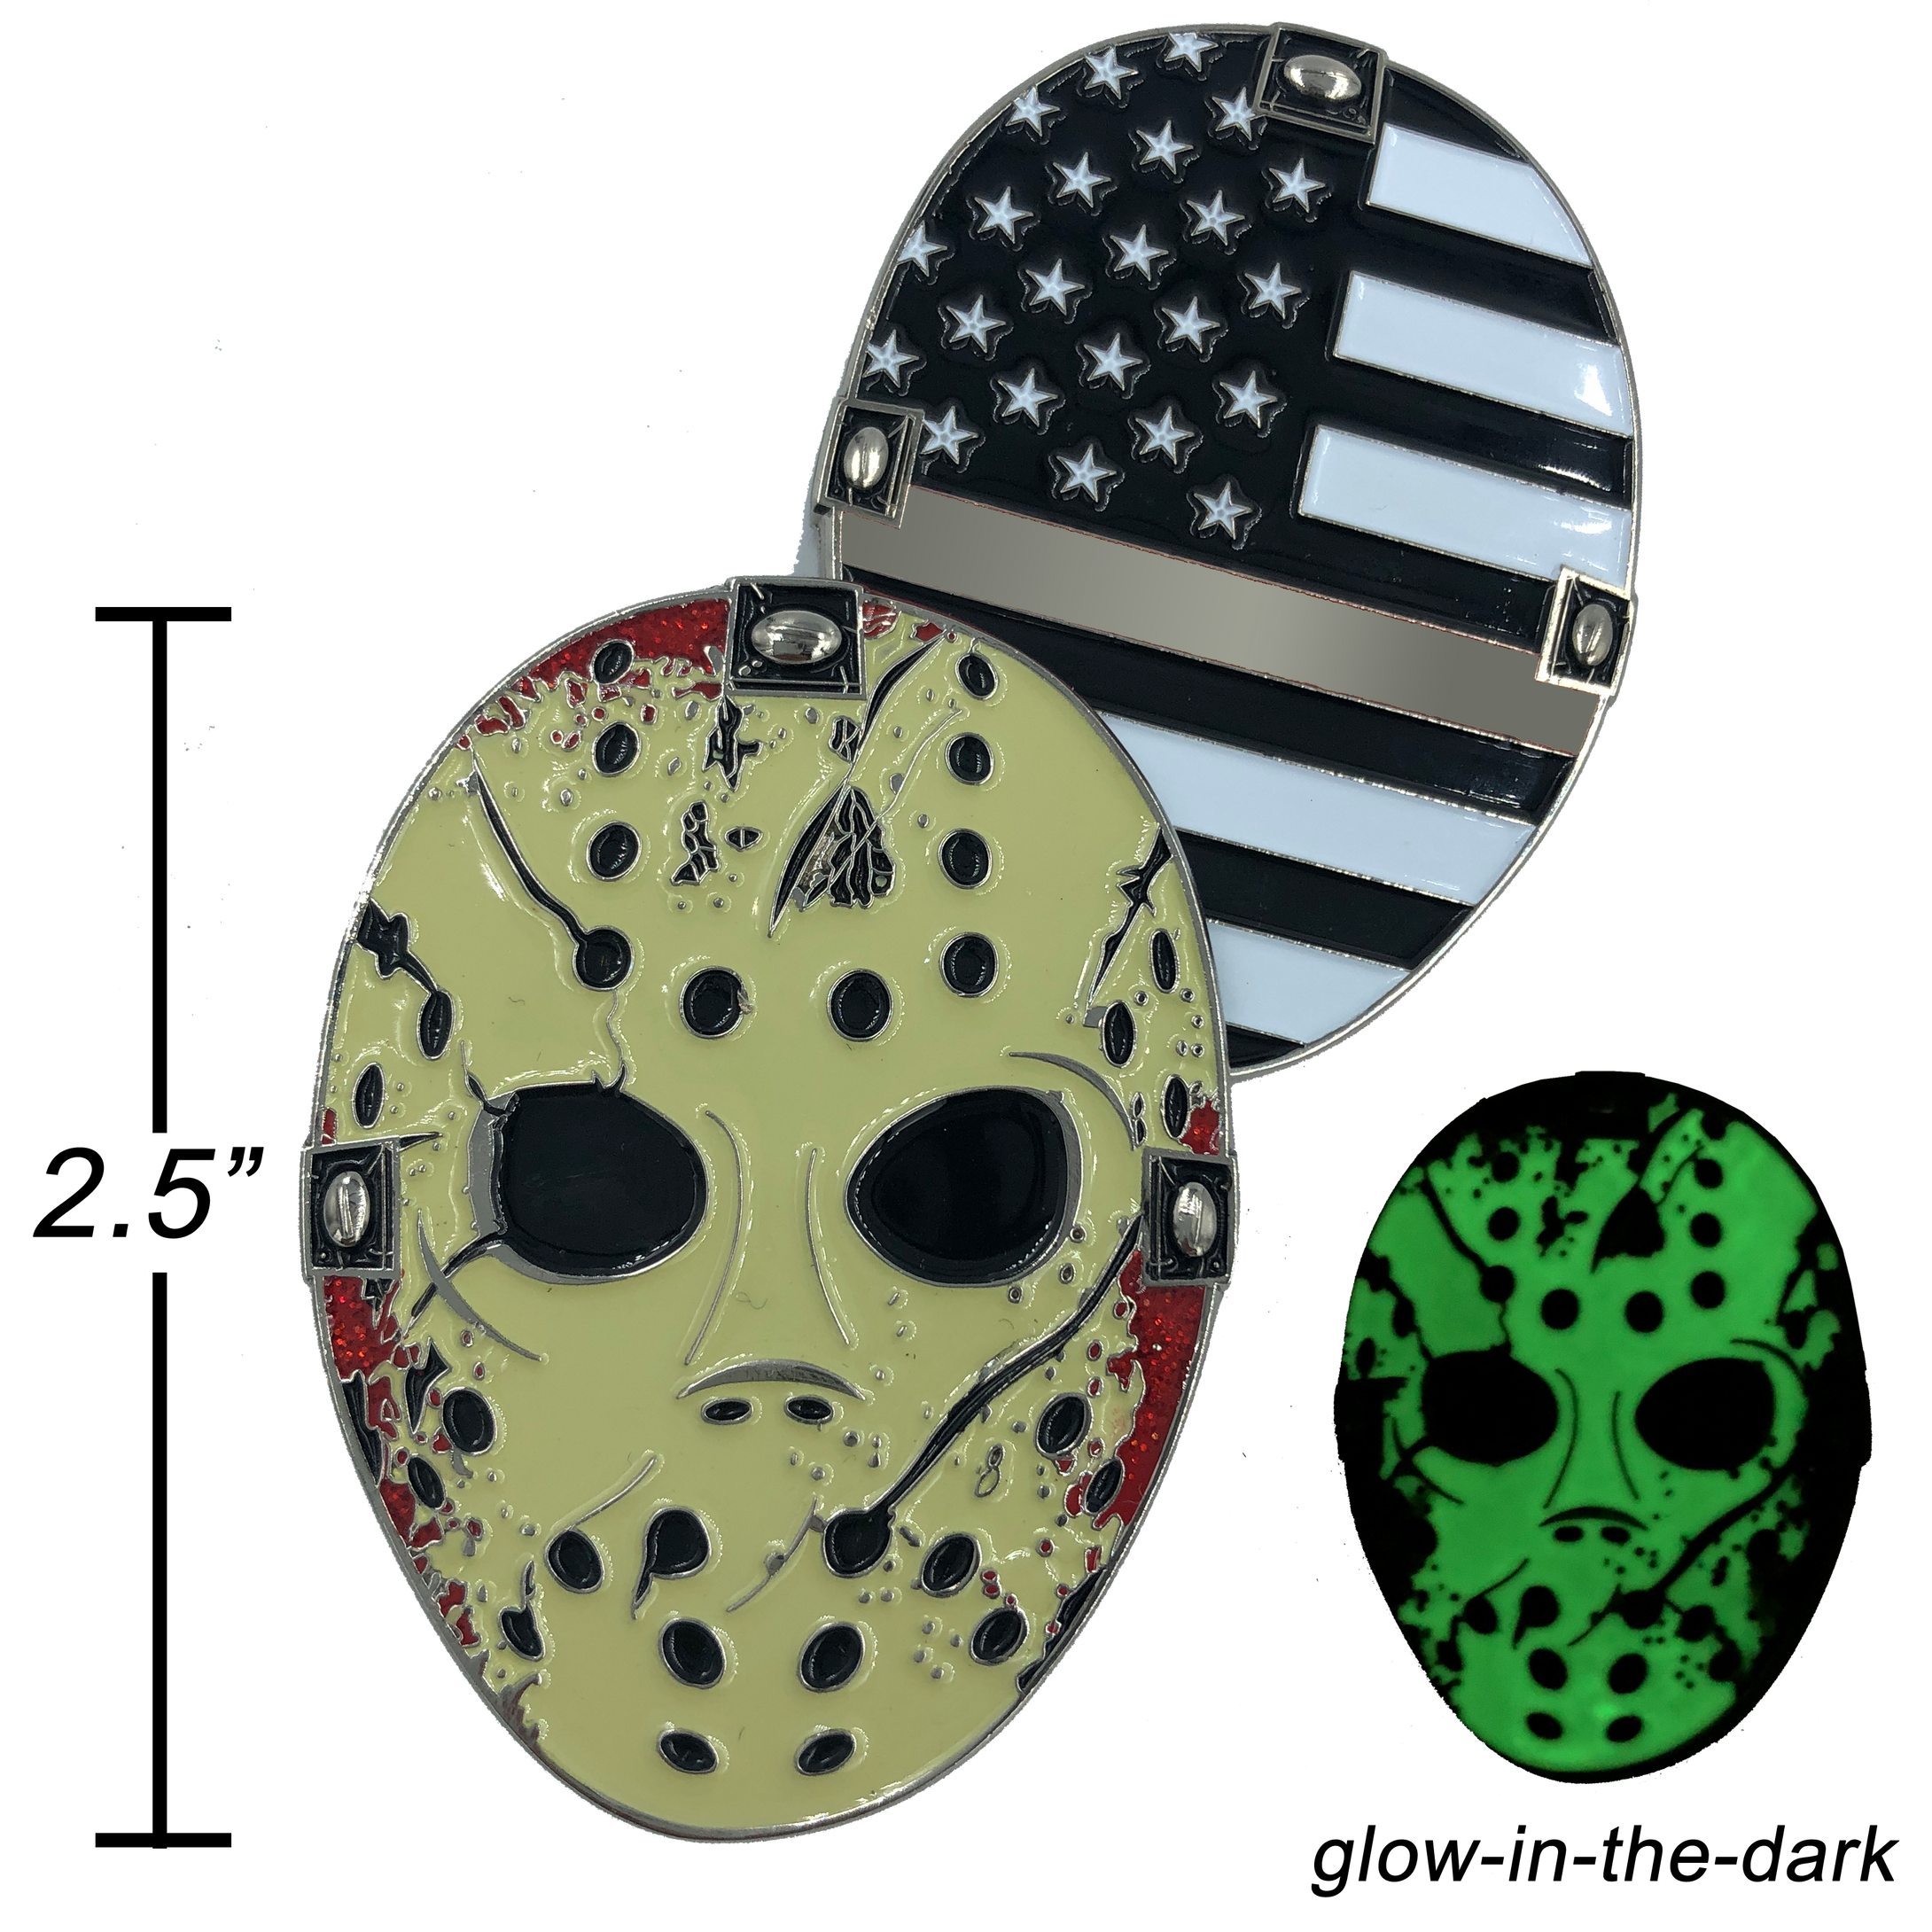 K-022 Thin Gray Line COrrections Jason Voorhees CO Goalie Mask Friday the 13th Correctional Officer